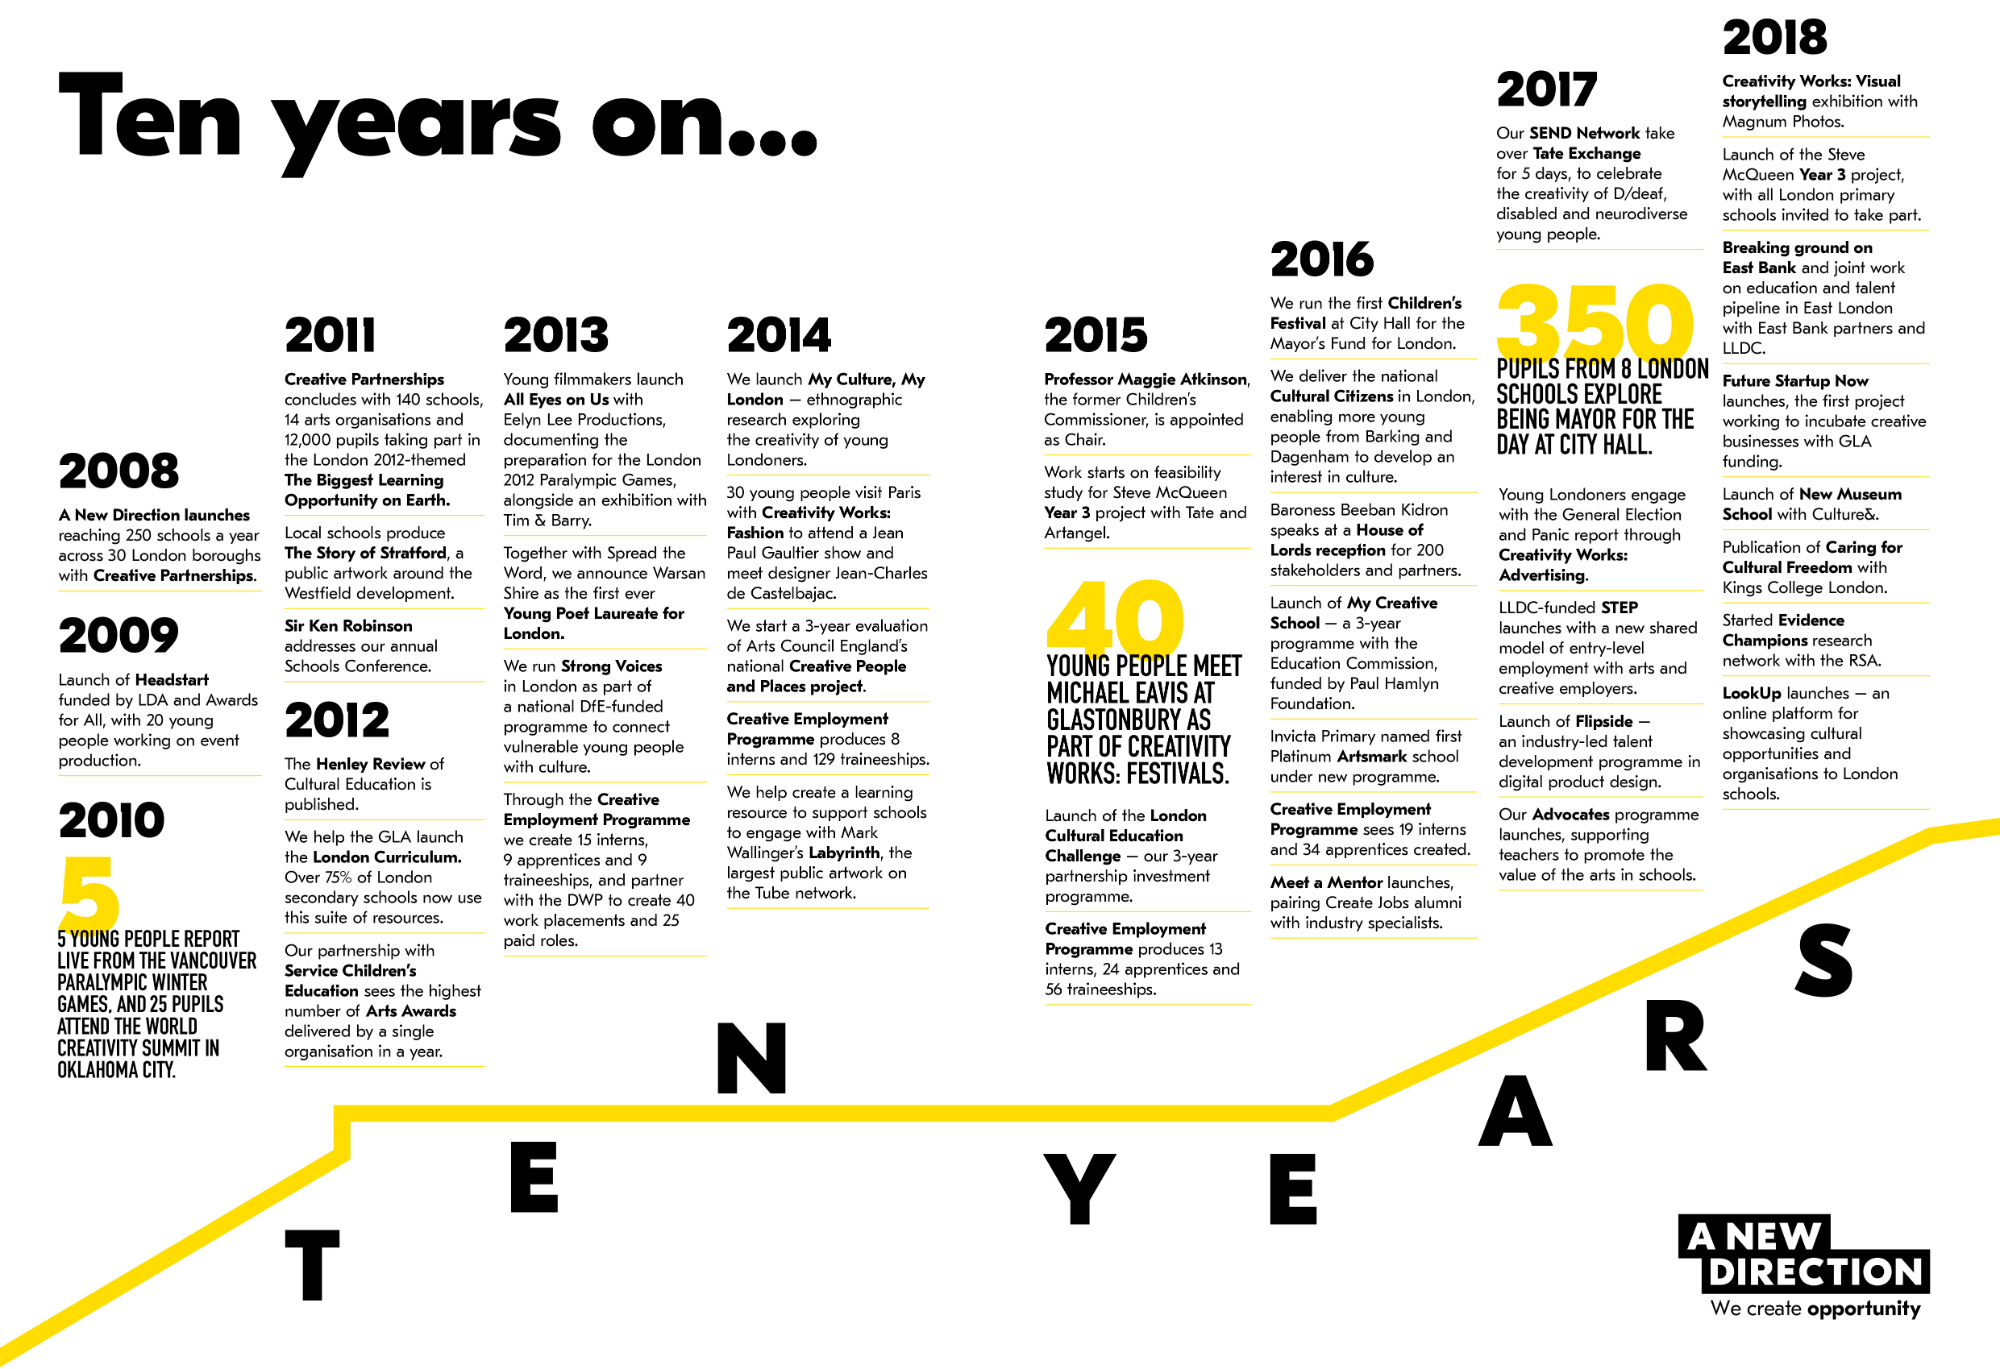 10 Year Timeline (A New Direction).jpg